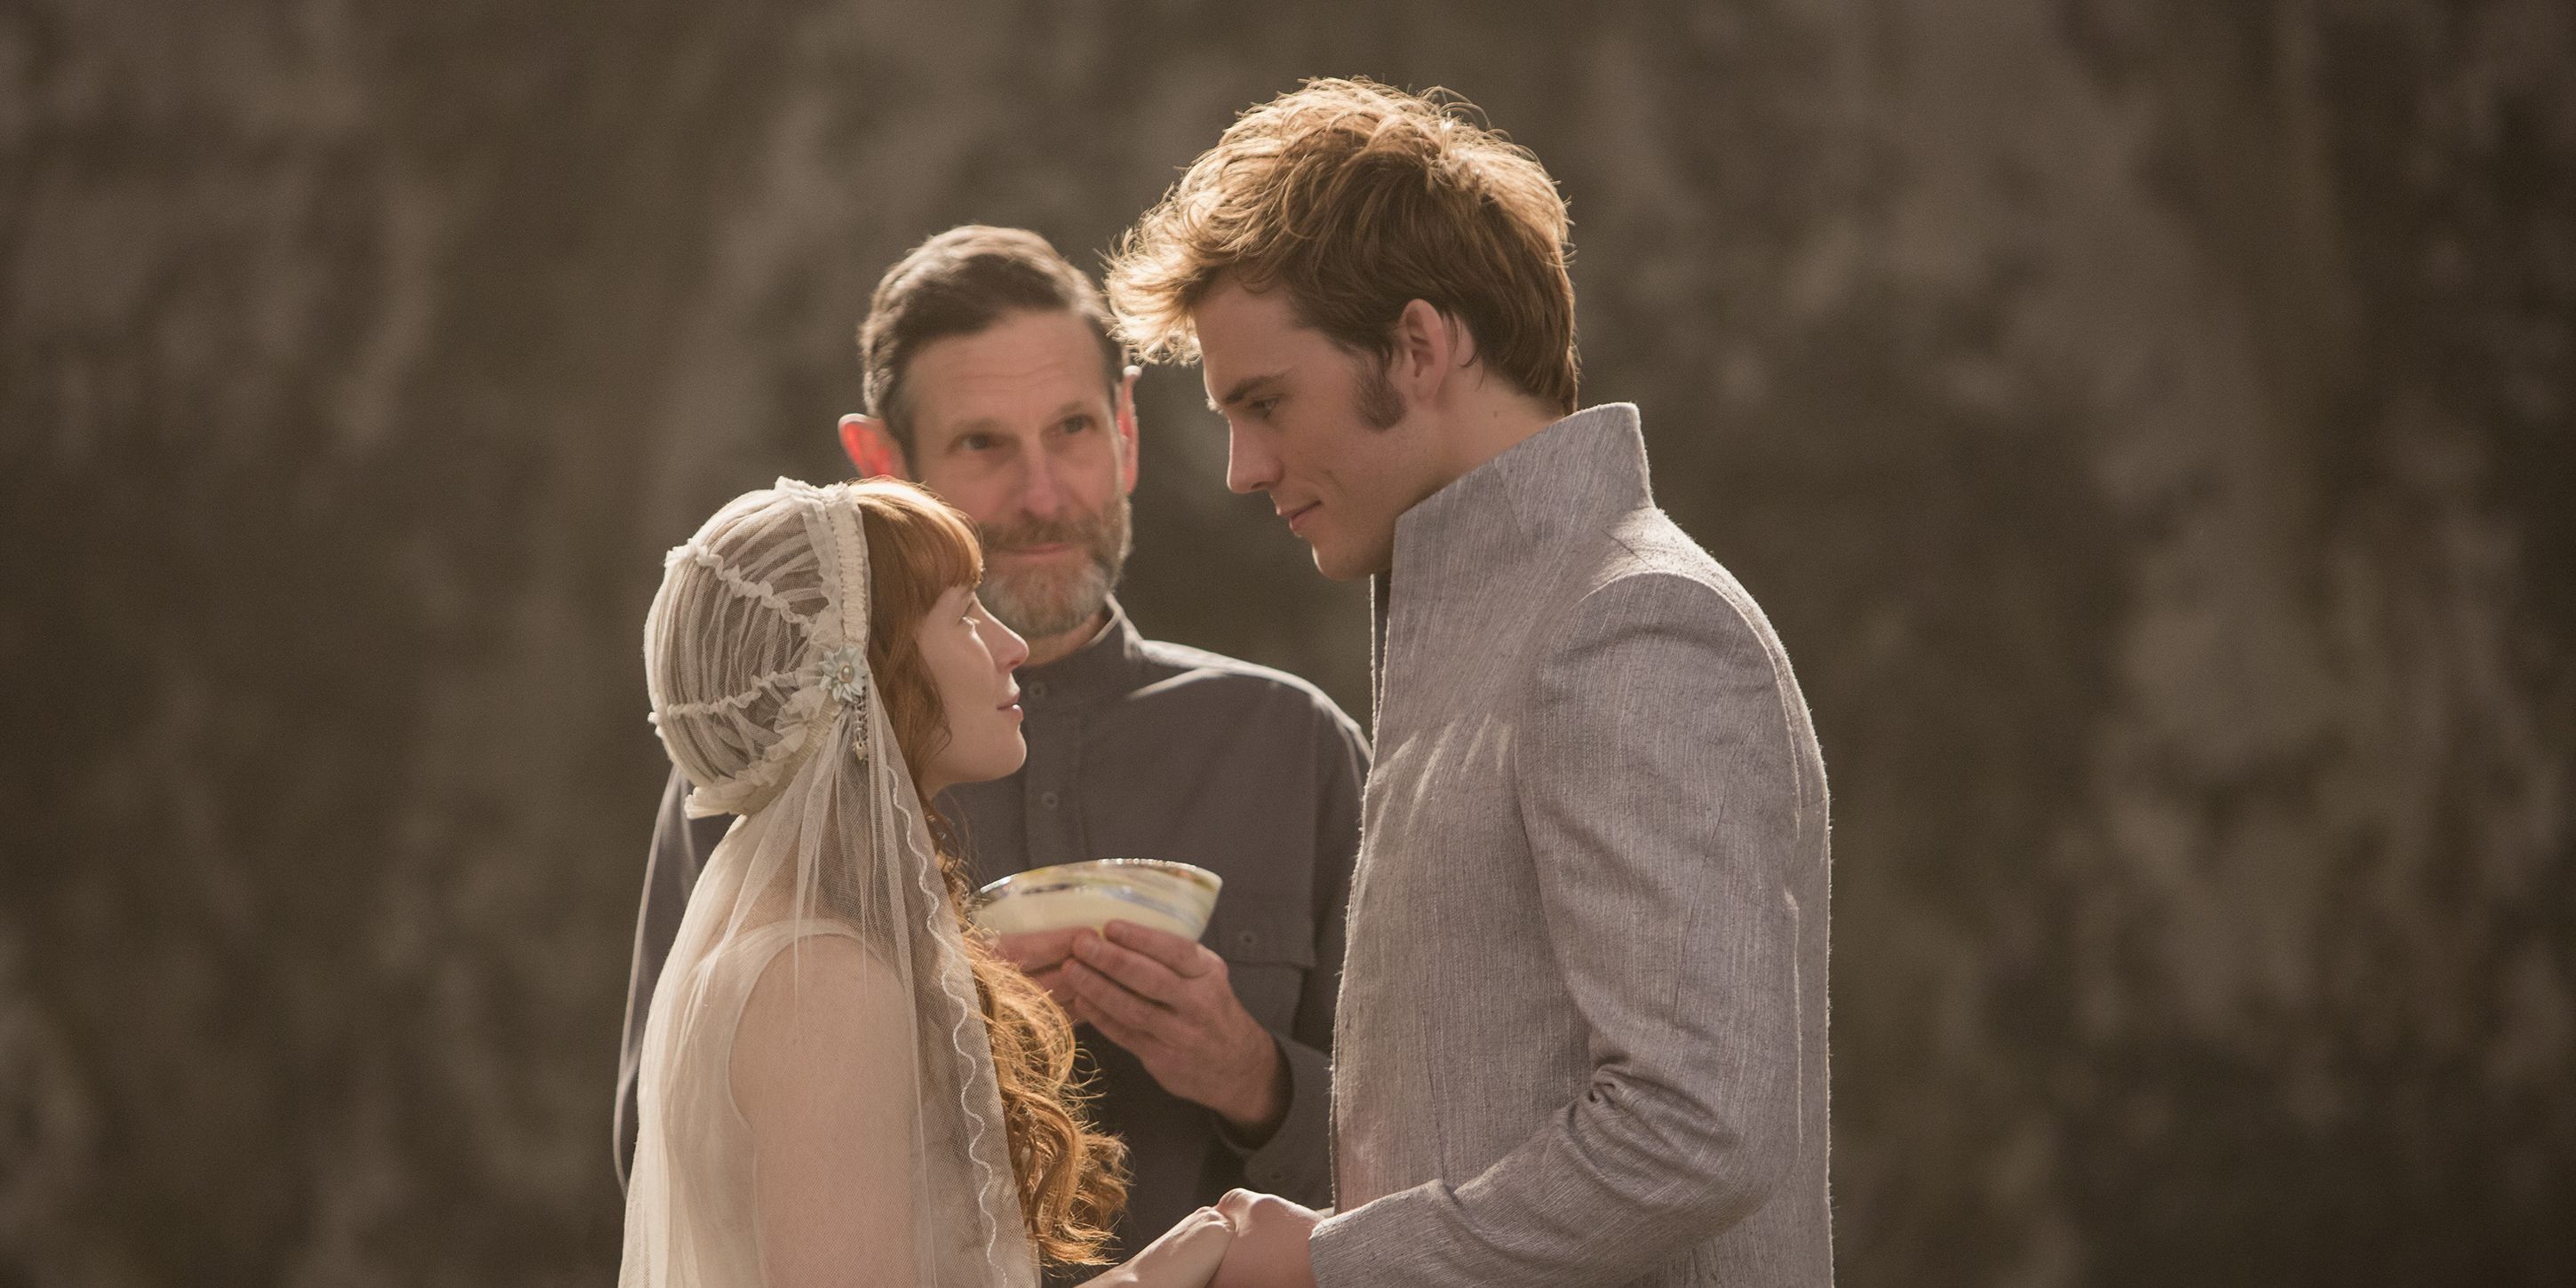 Annie and Finnick marry in Hunger Games: Mockingjay Part 2